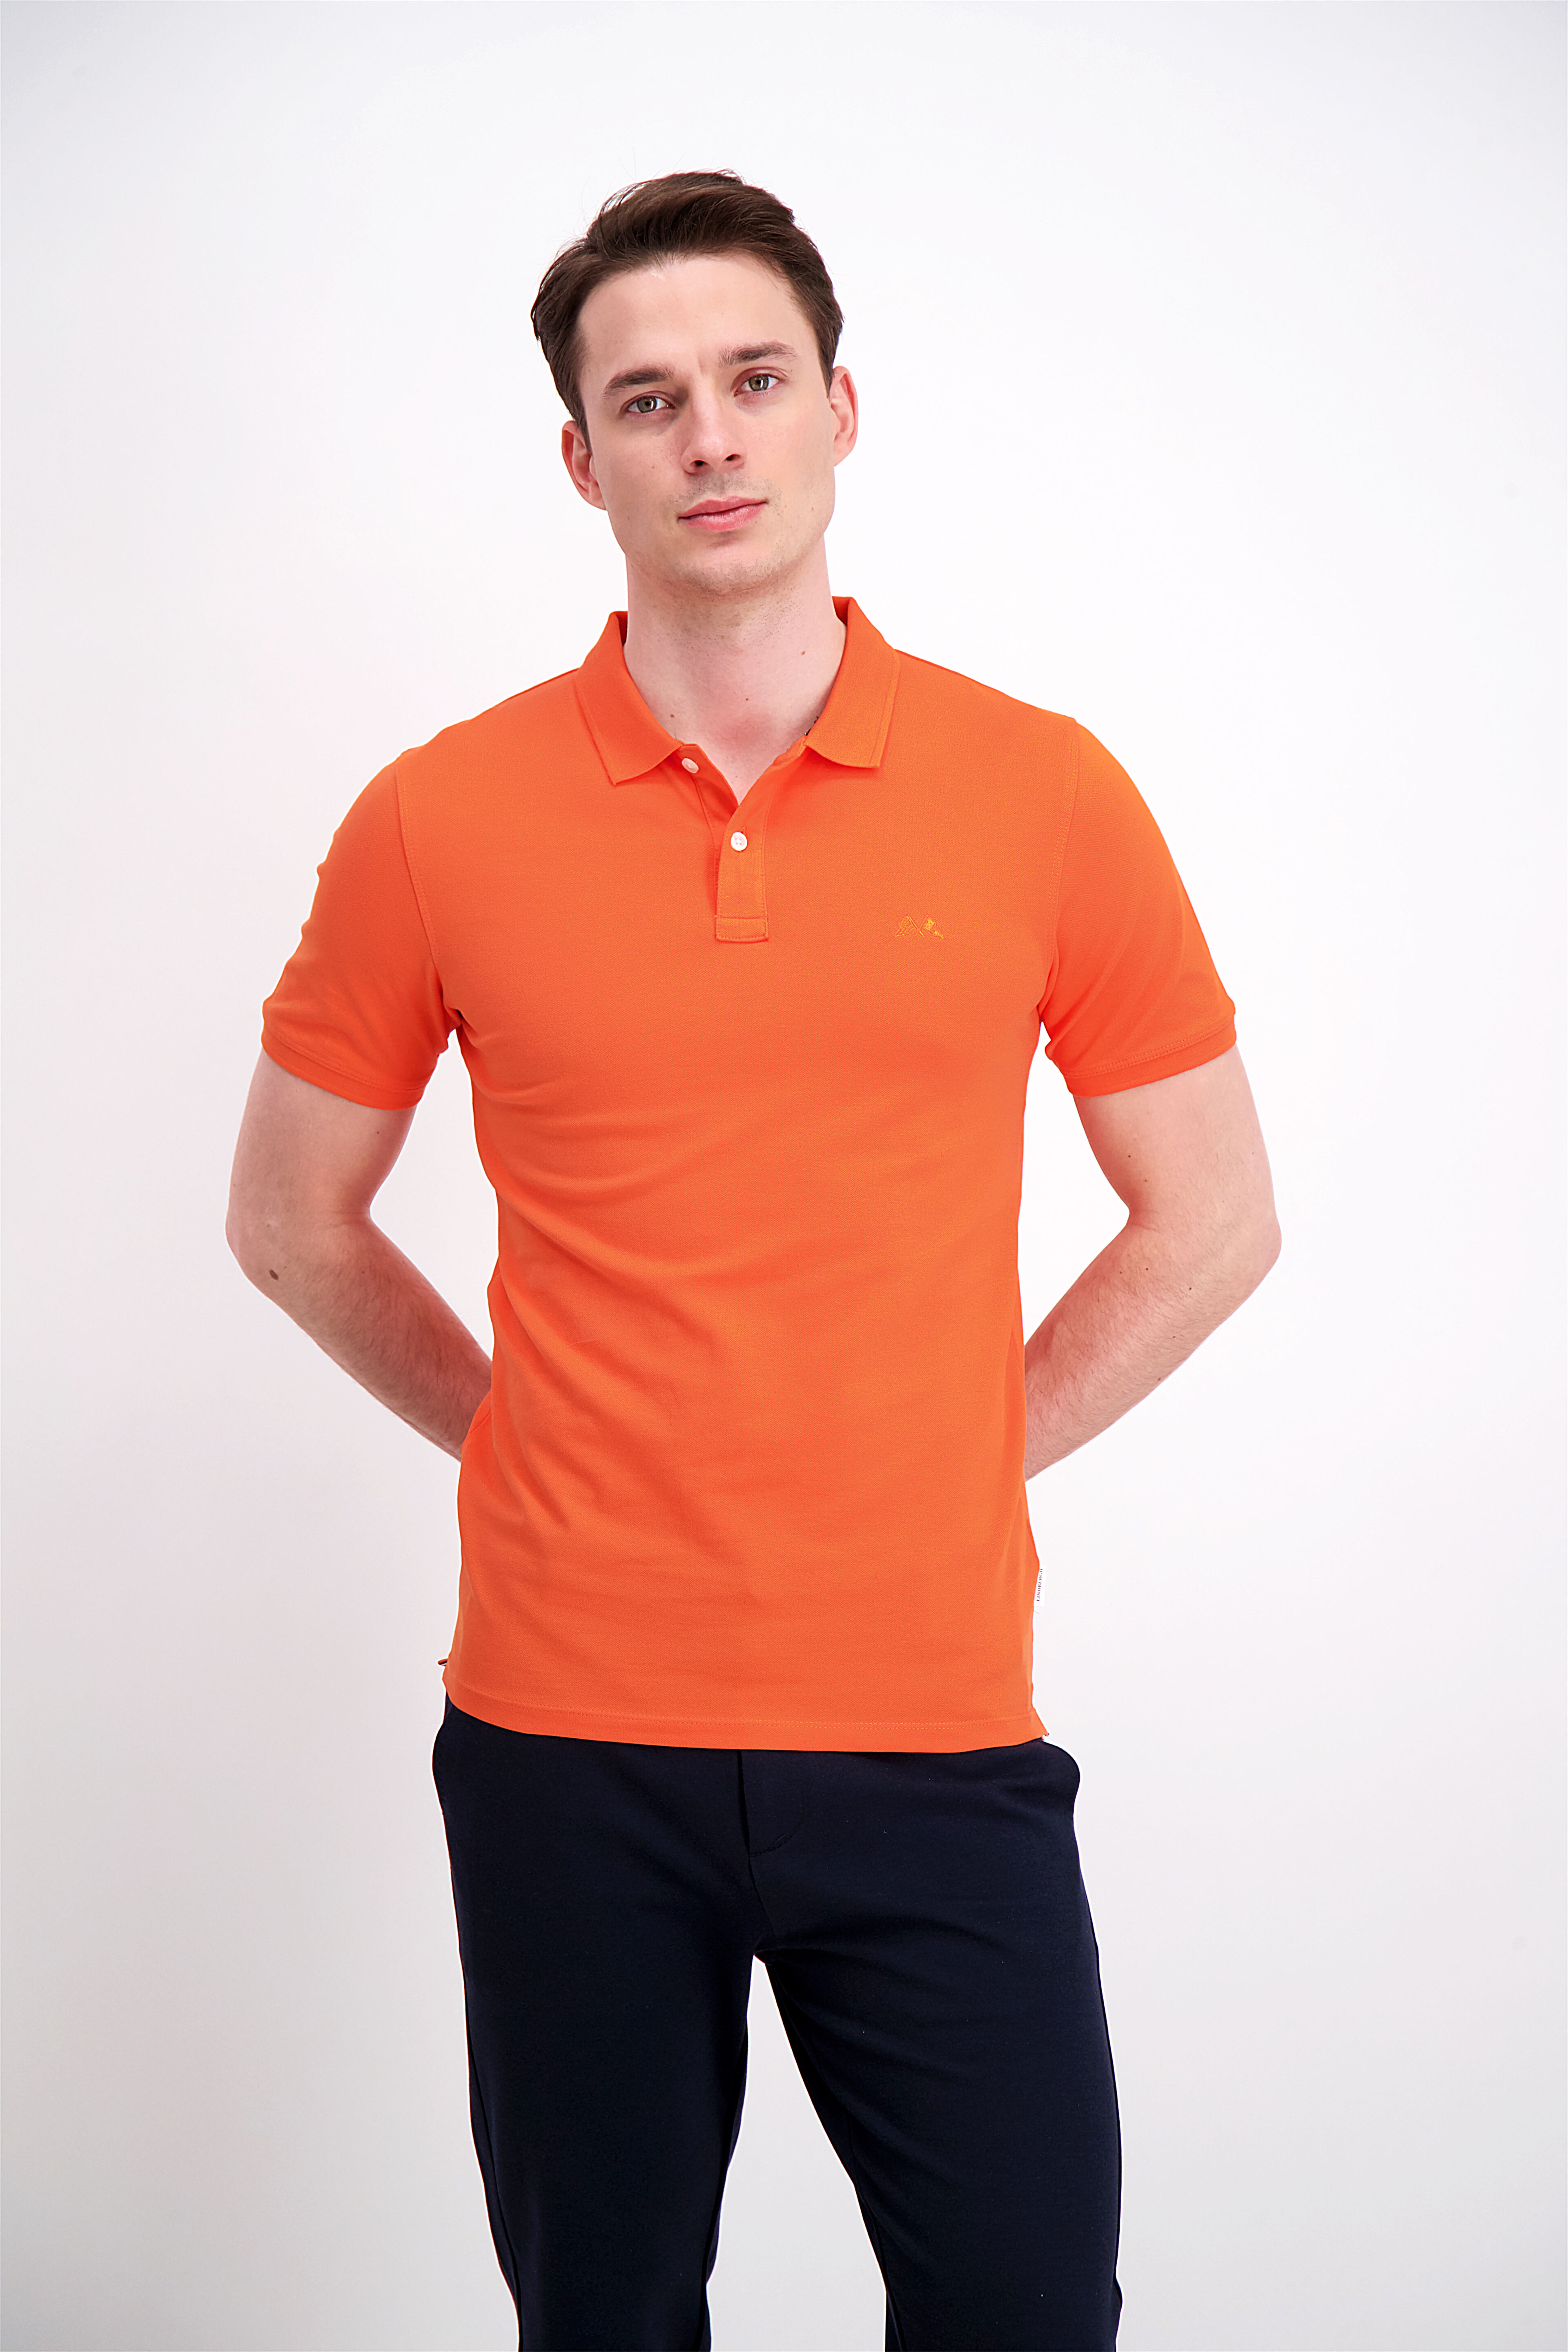 Polo shirt | Relaxed fit 30-404016